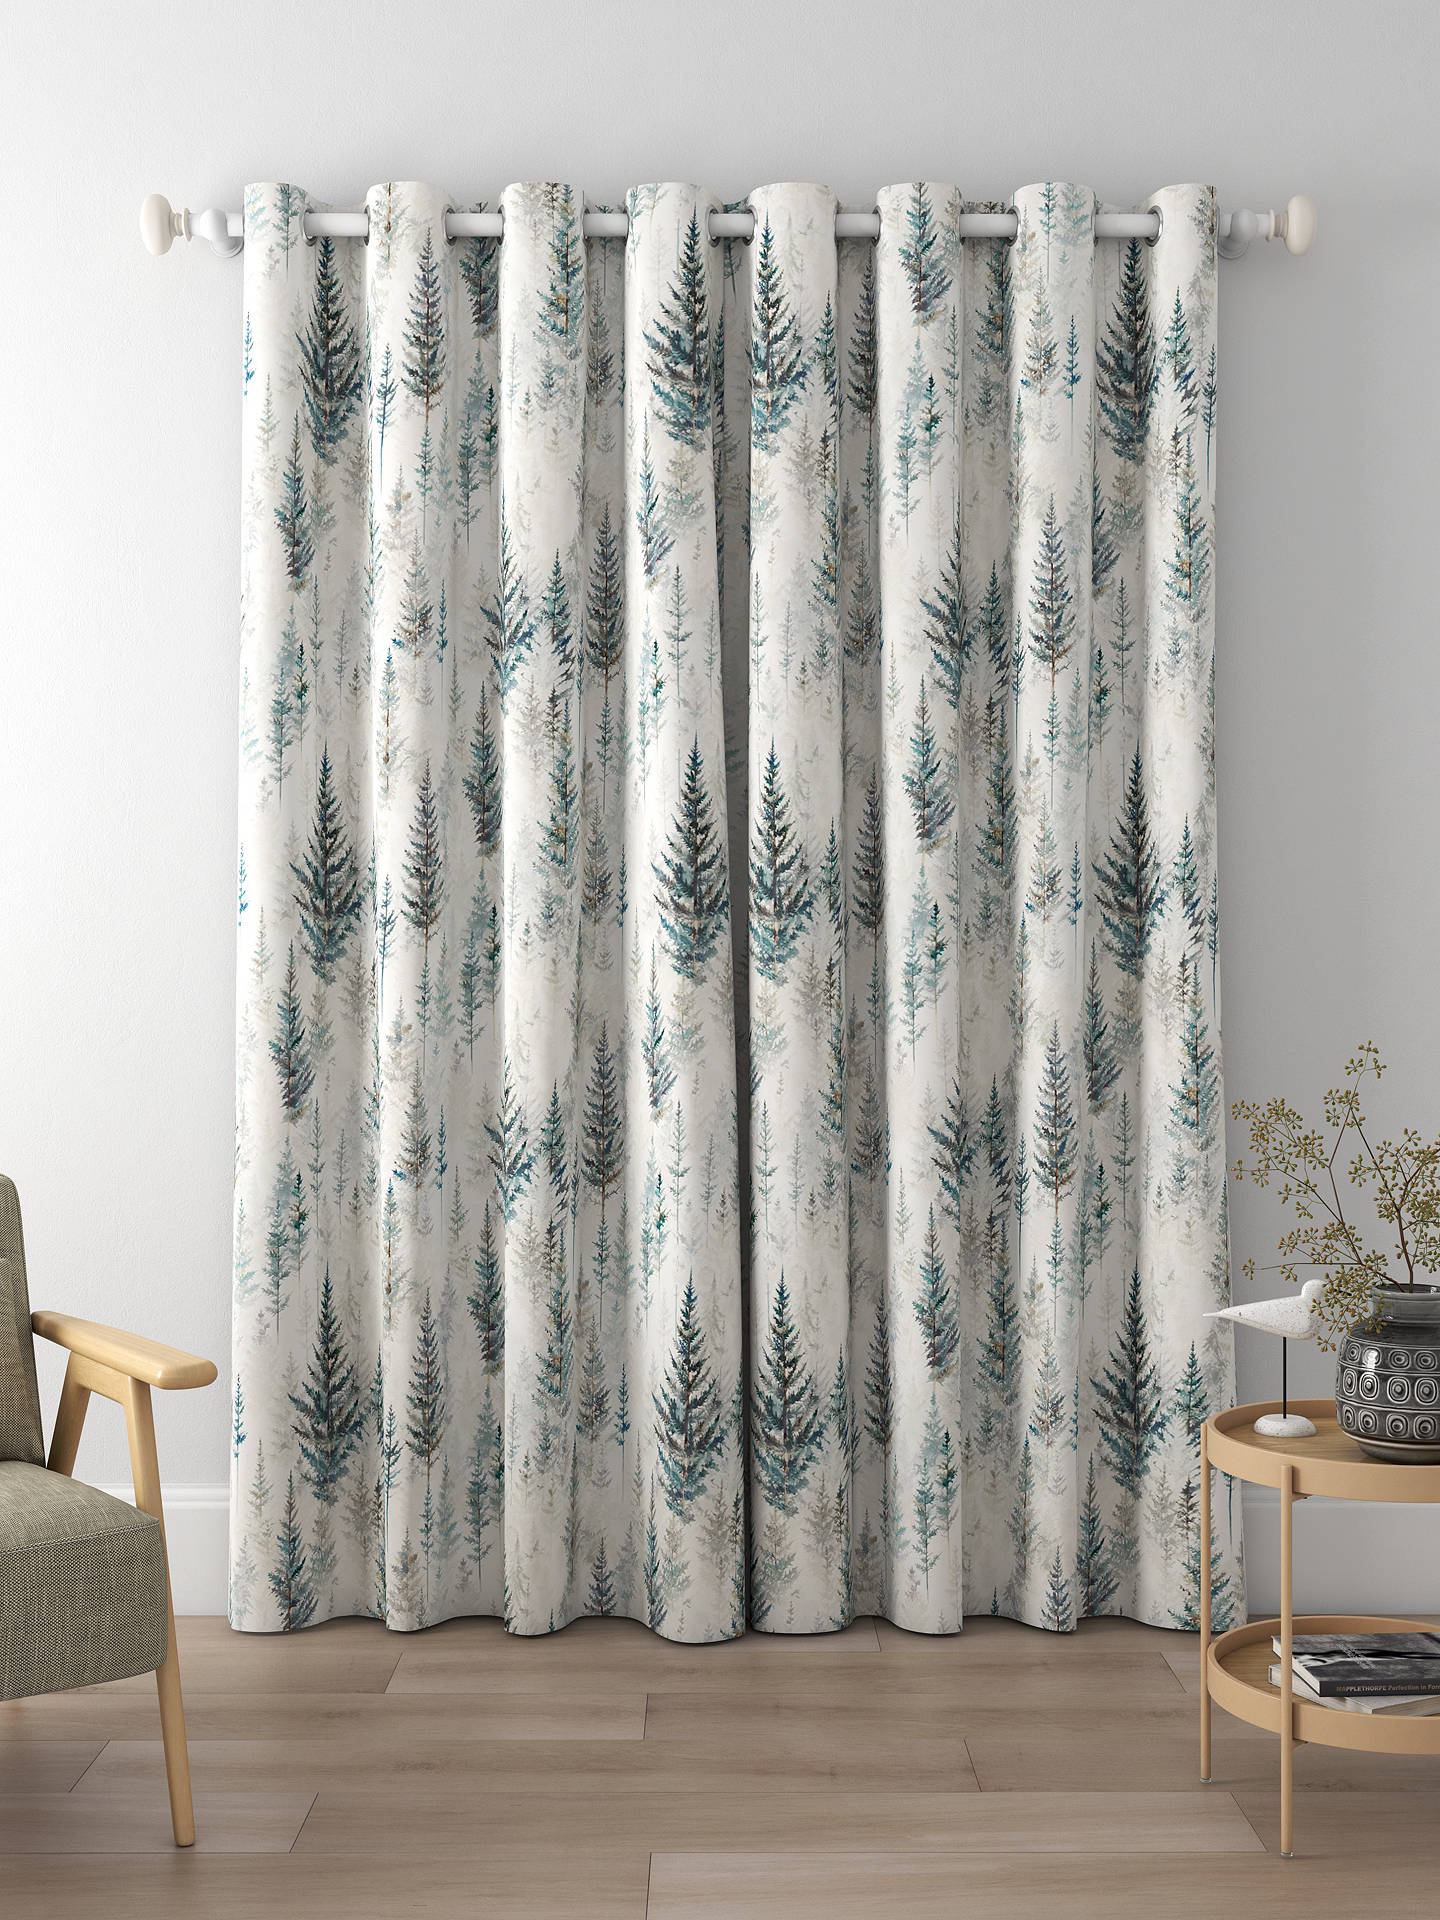 Sanderson Juniper Pine Made to Measure Curtains, Forest